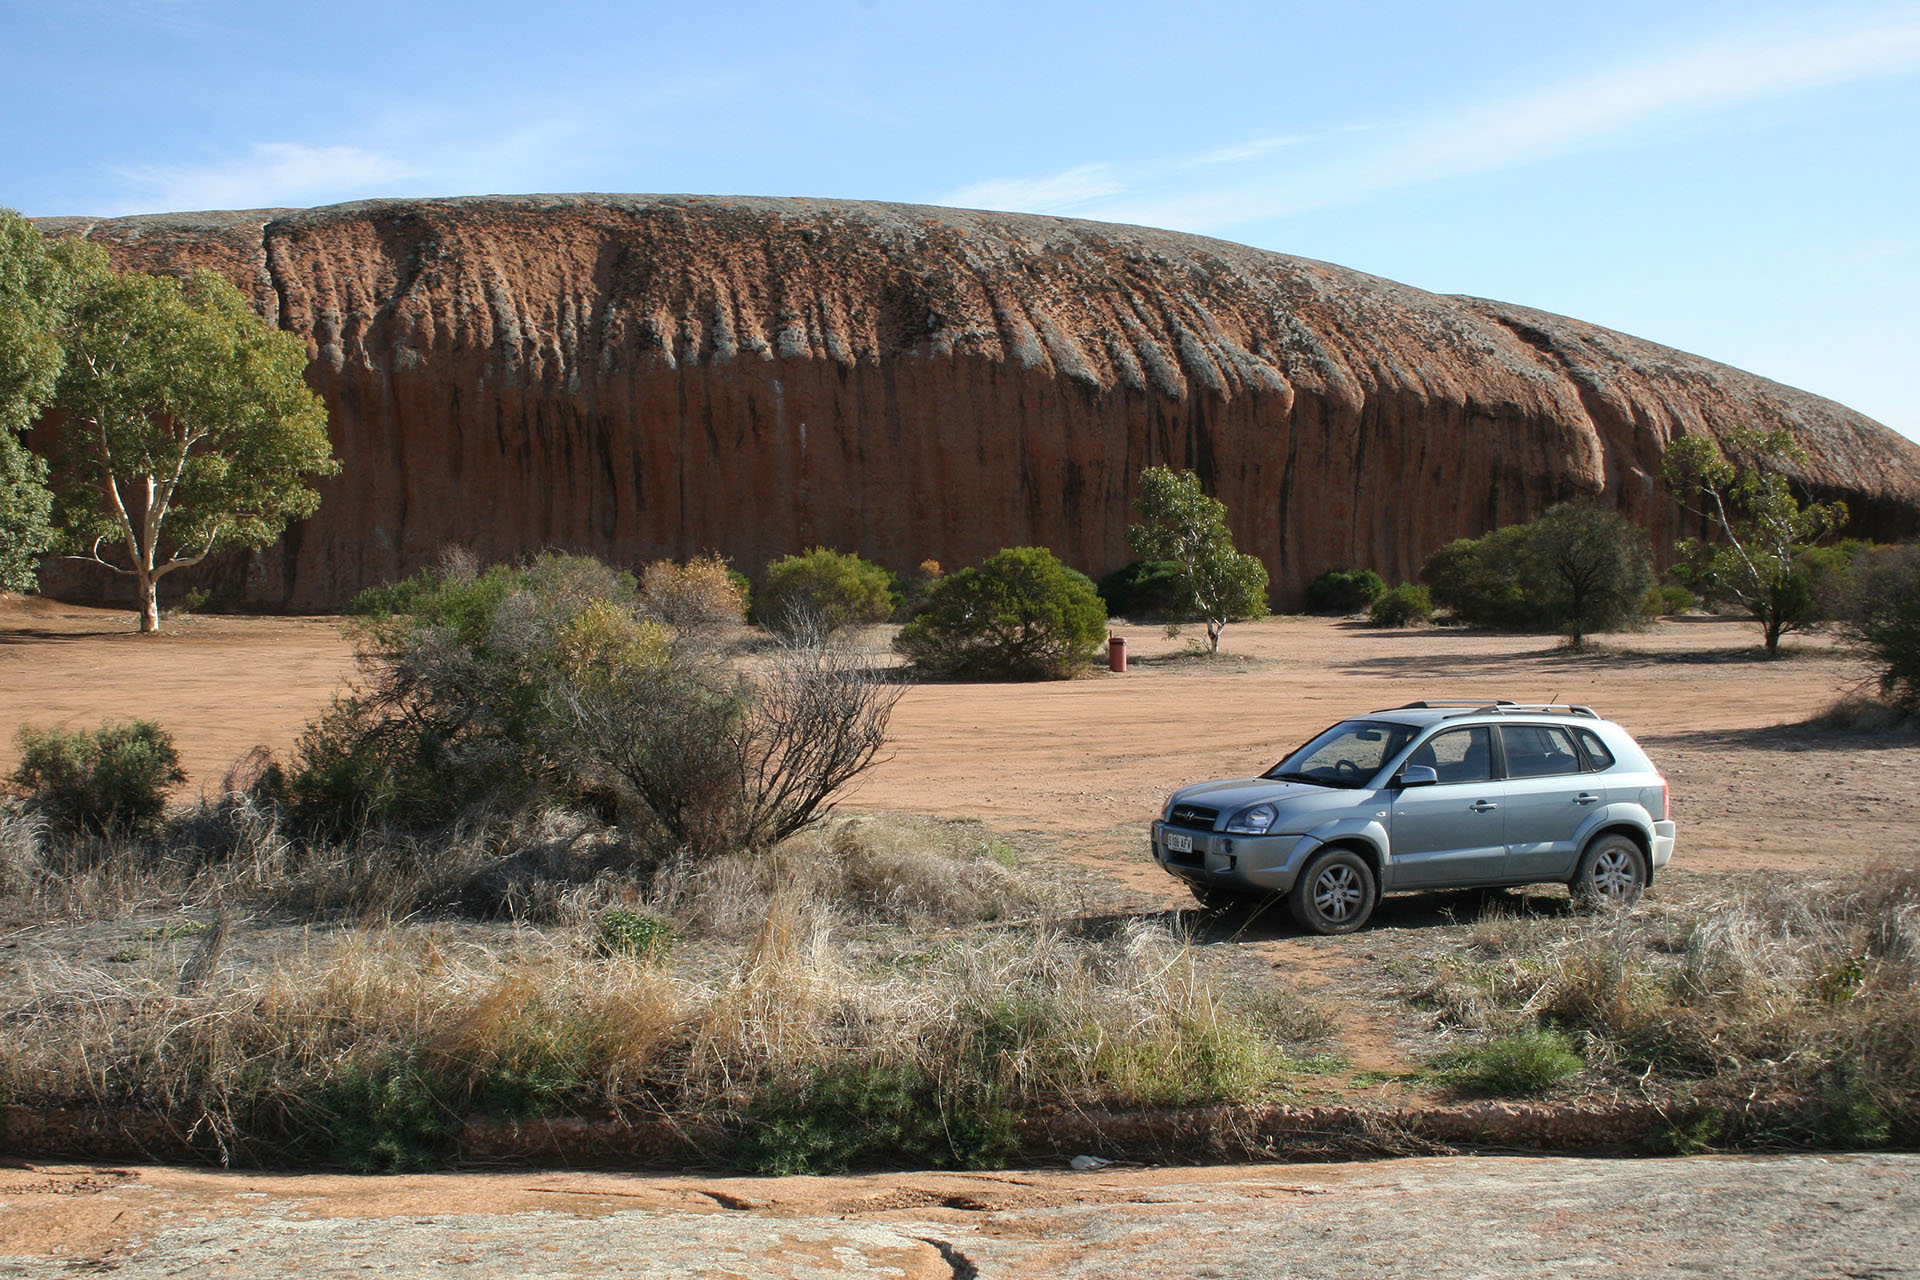 Pildappa Rock and my Tucson (just to scale).